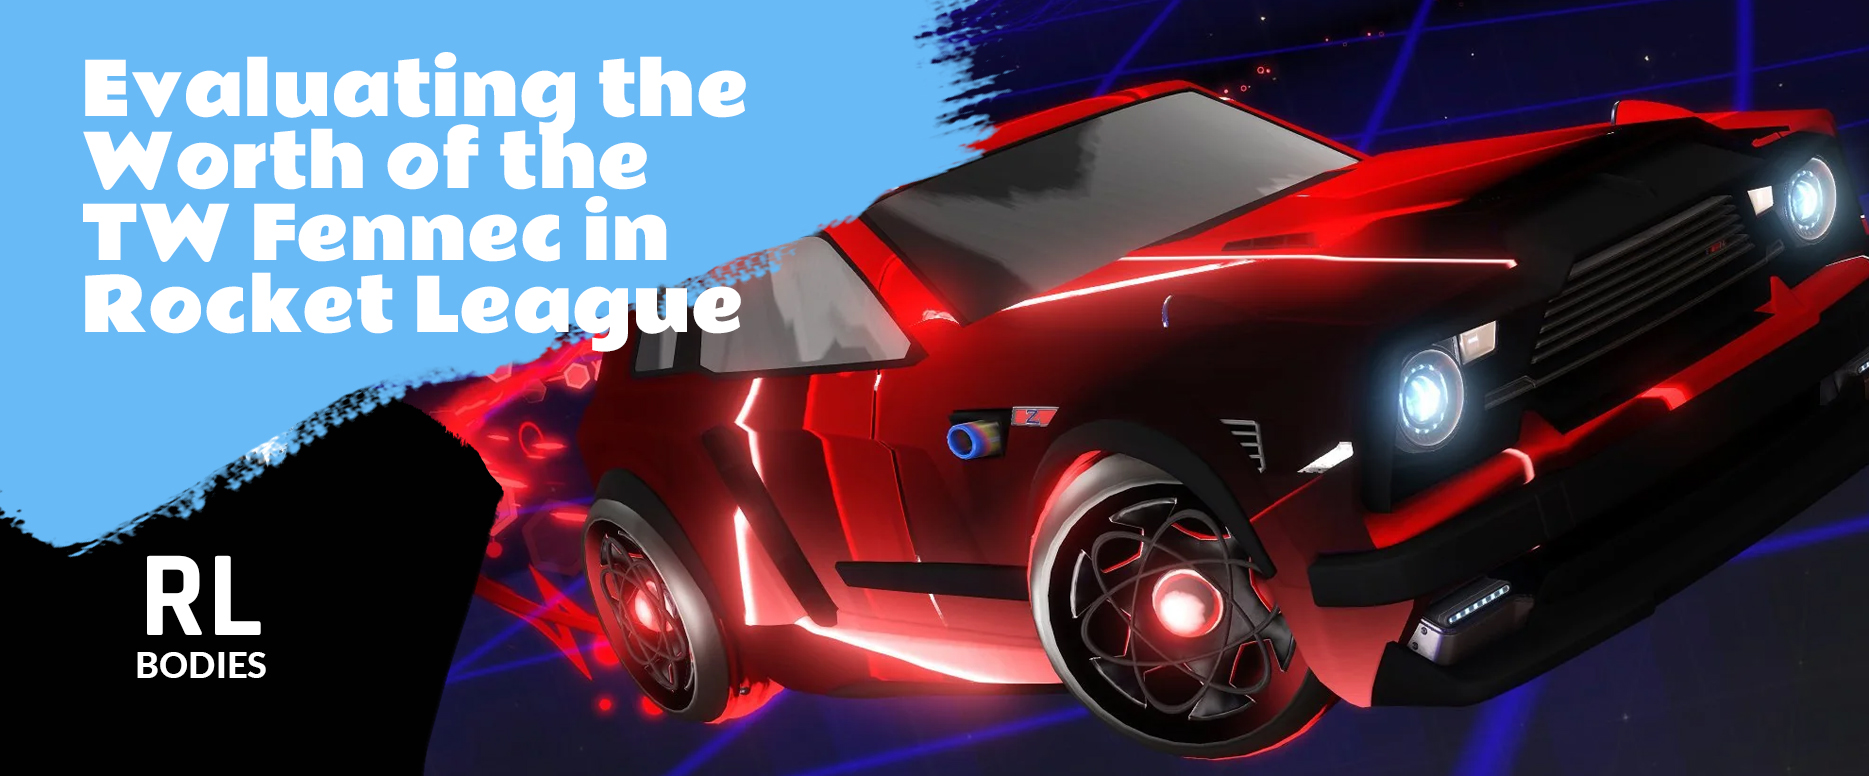 Evaluating the Worth of the TW Fennec in Rocket League 